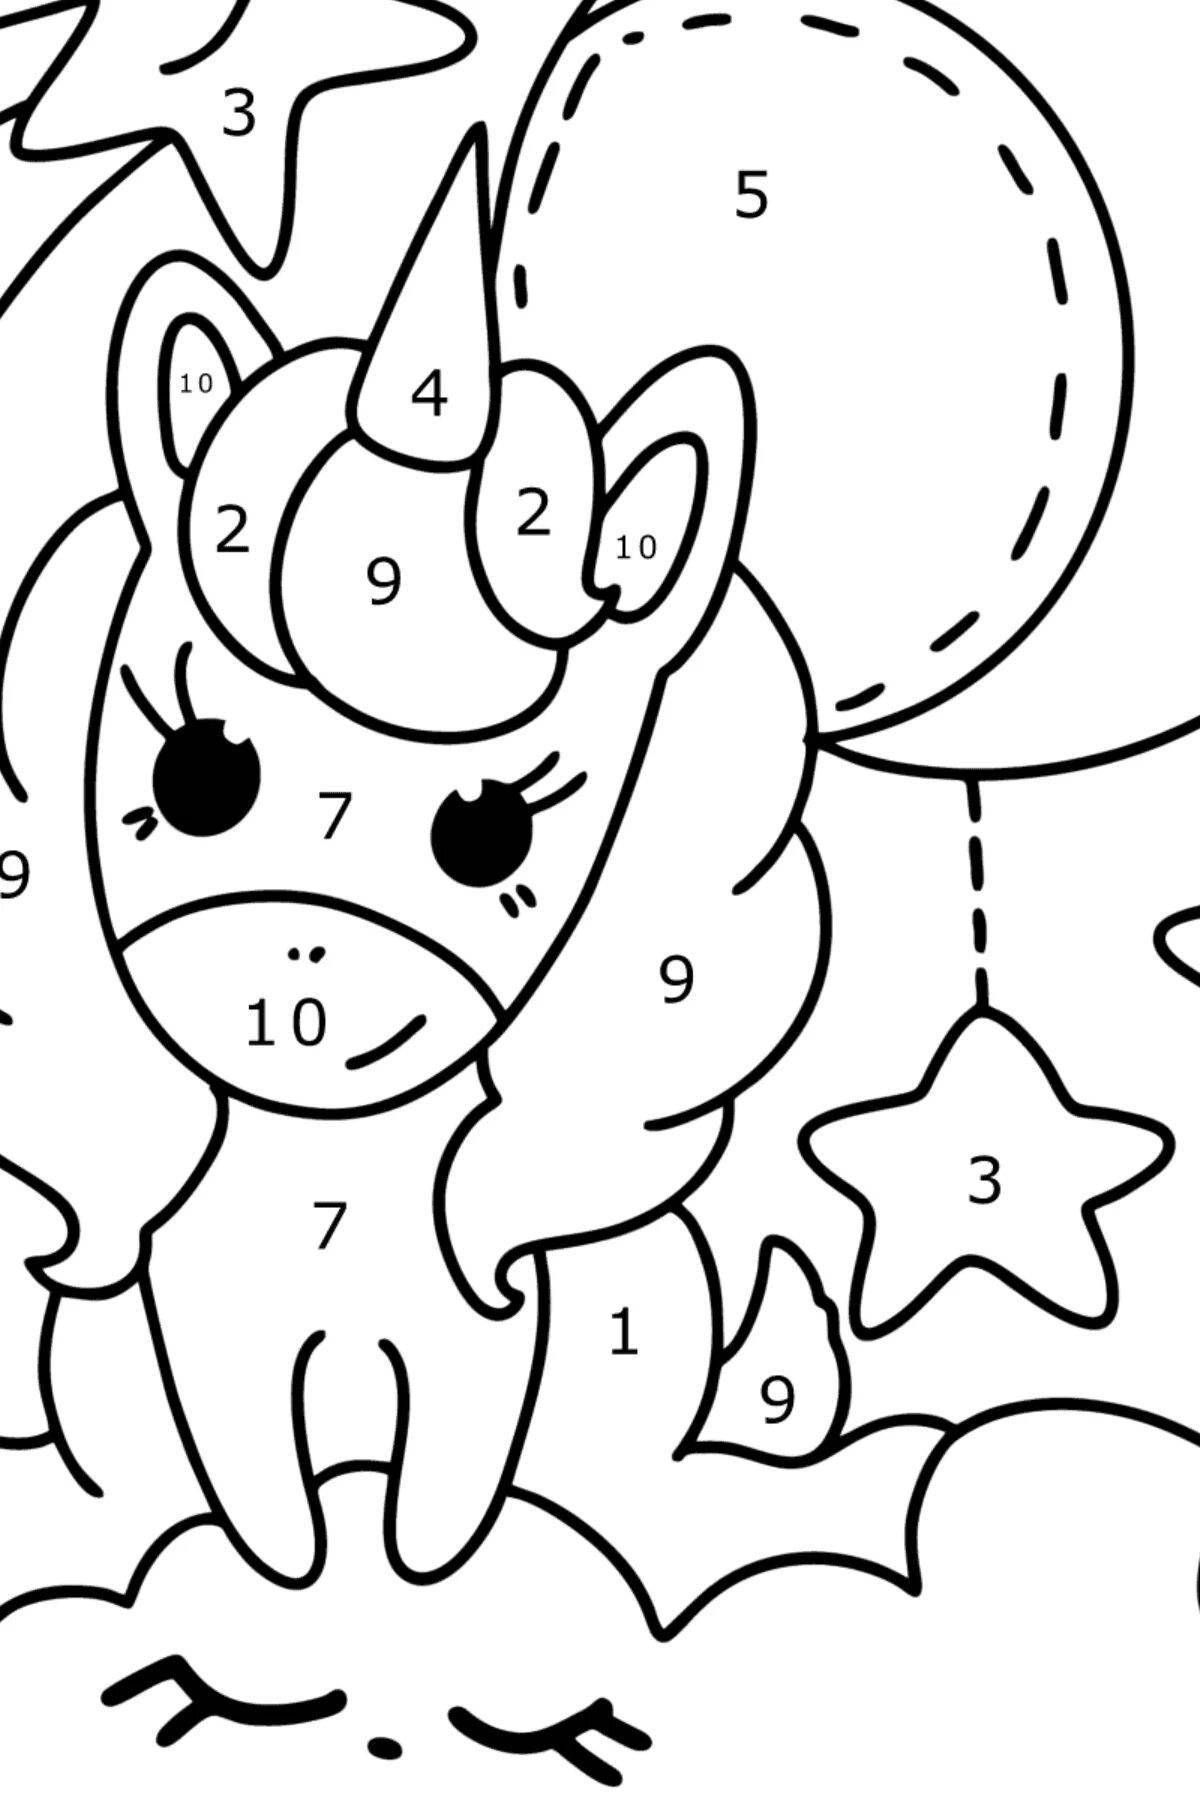 Funny unicorn coloring by numbers for kids